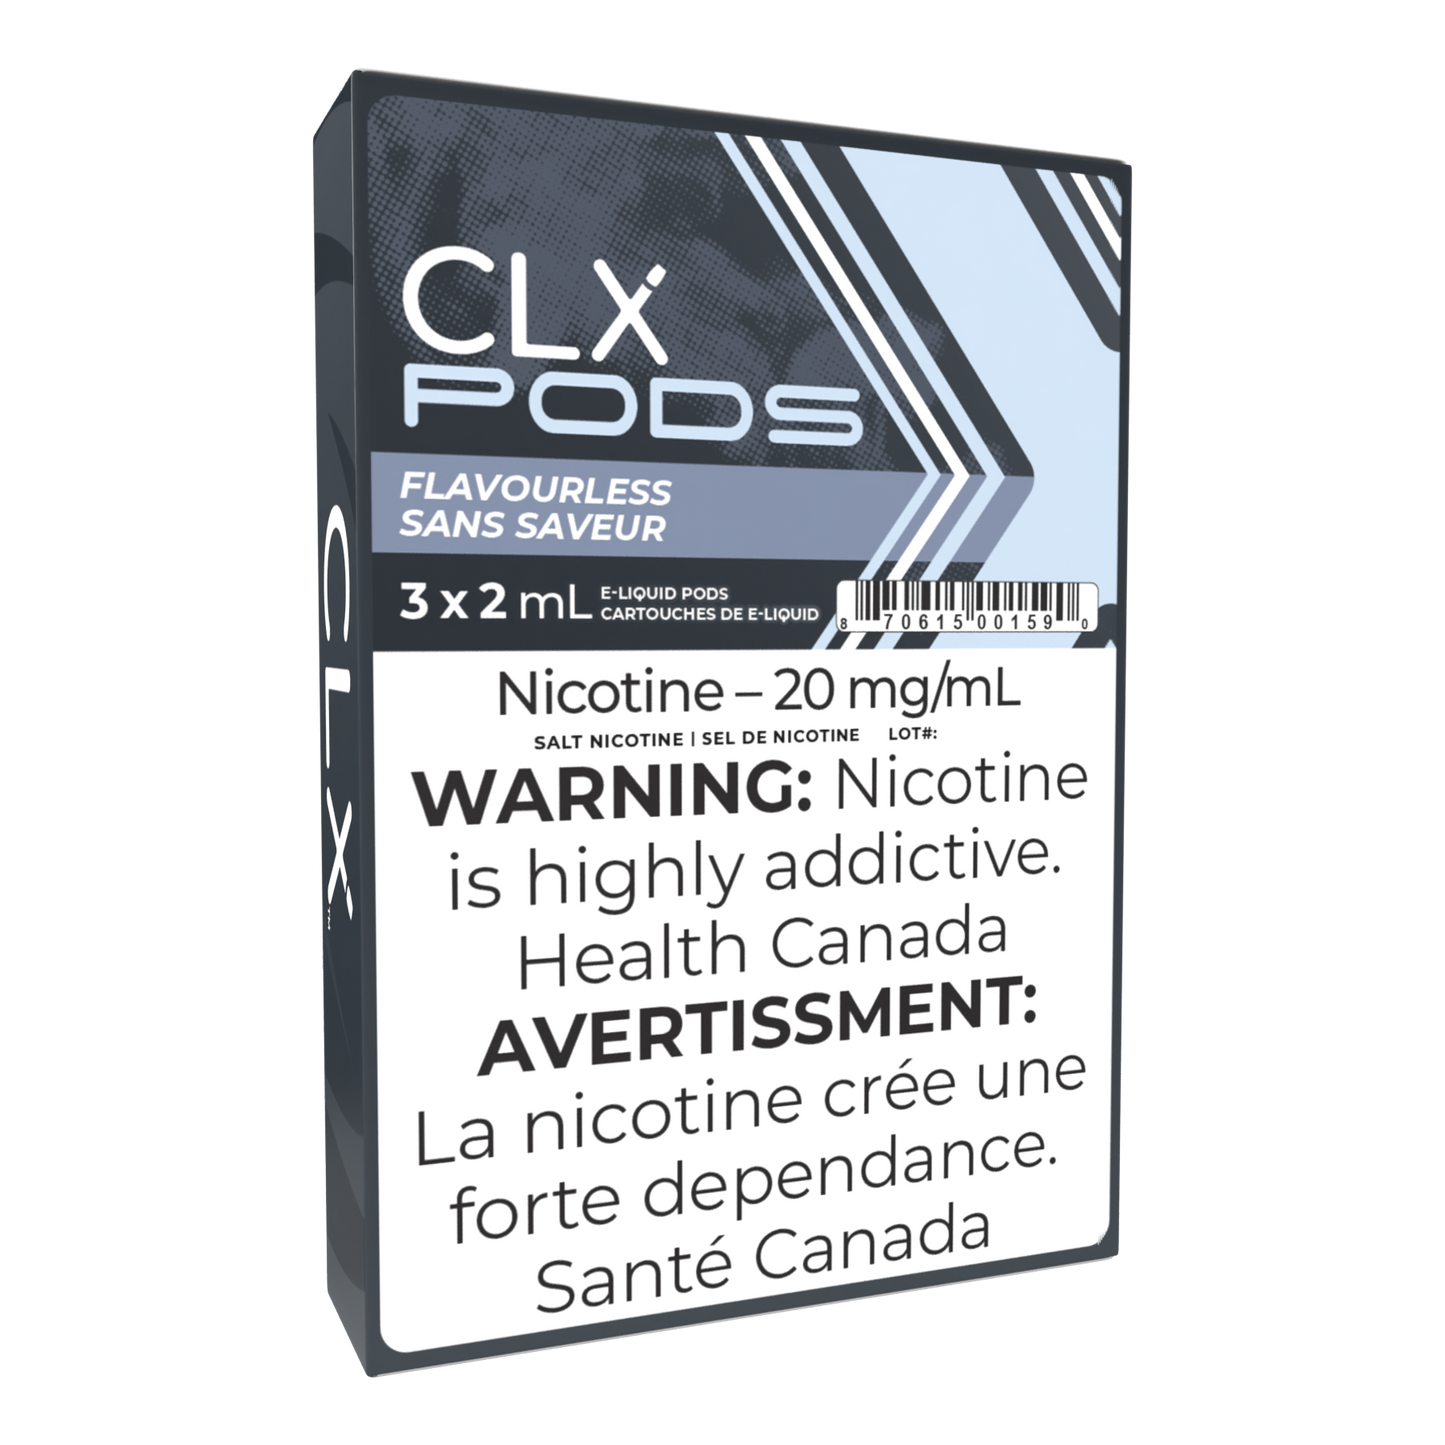 CLX - Flavourless Pods